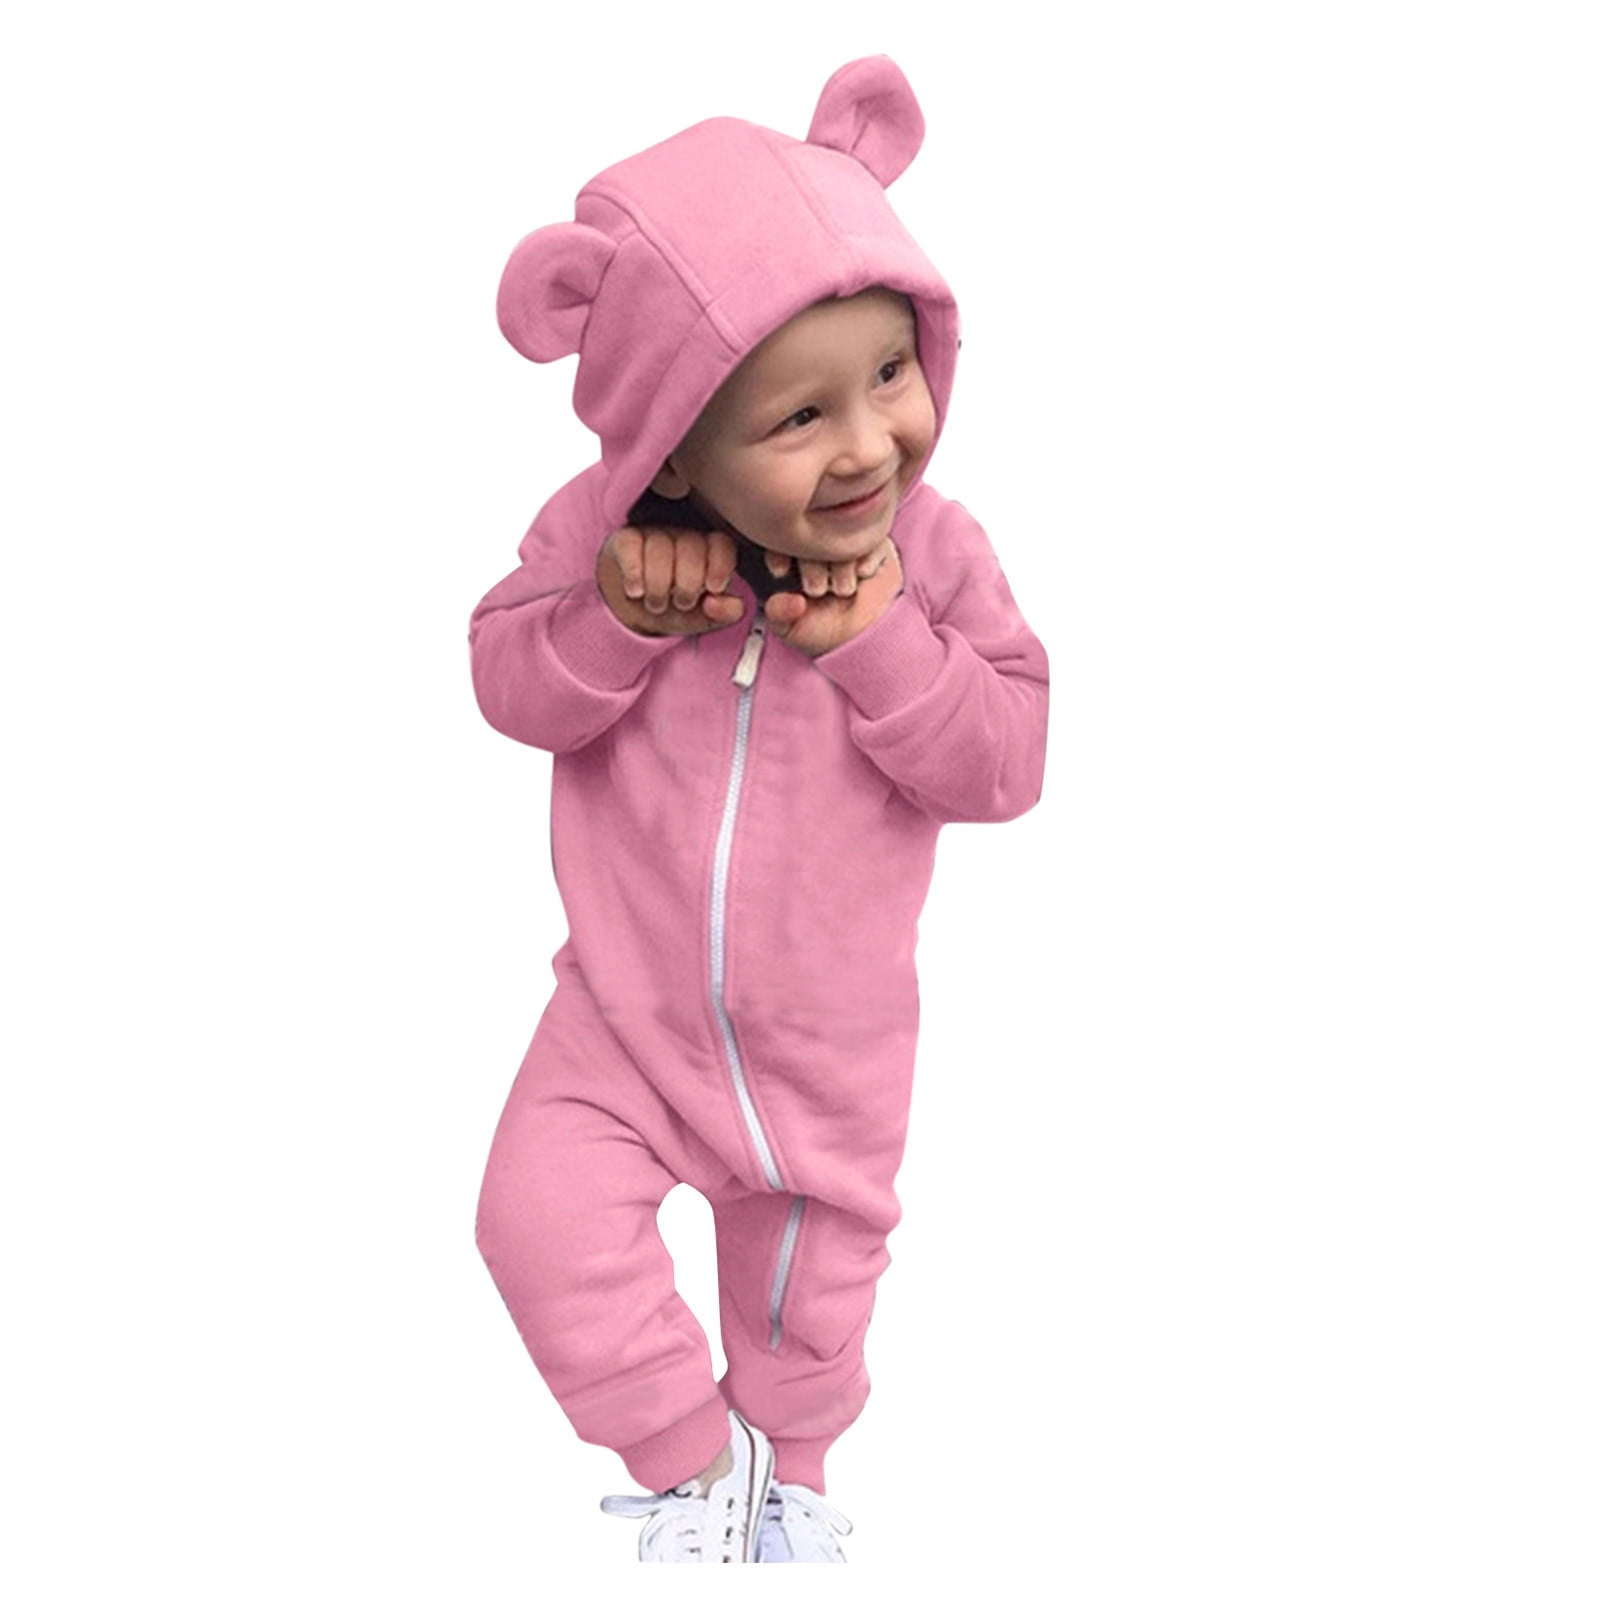 Girls Baby Romper Pink Mouse Hooded Playsuit with Ears Newborn to 12 Months 